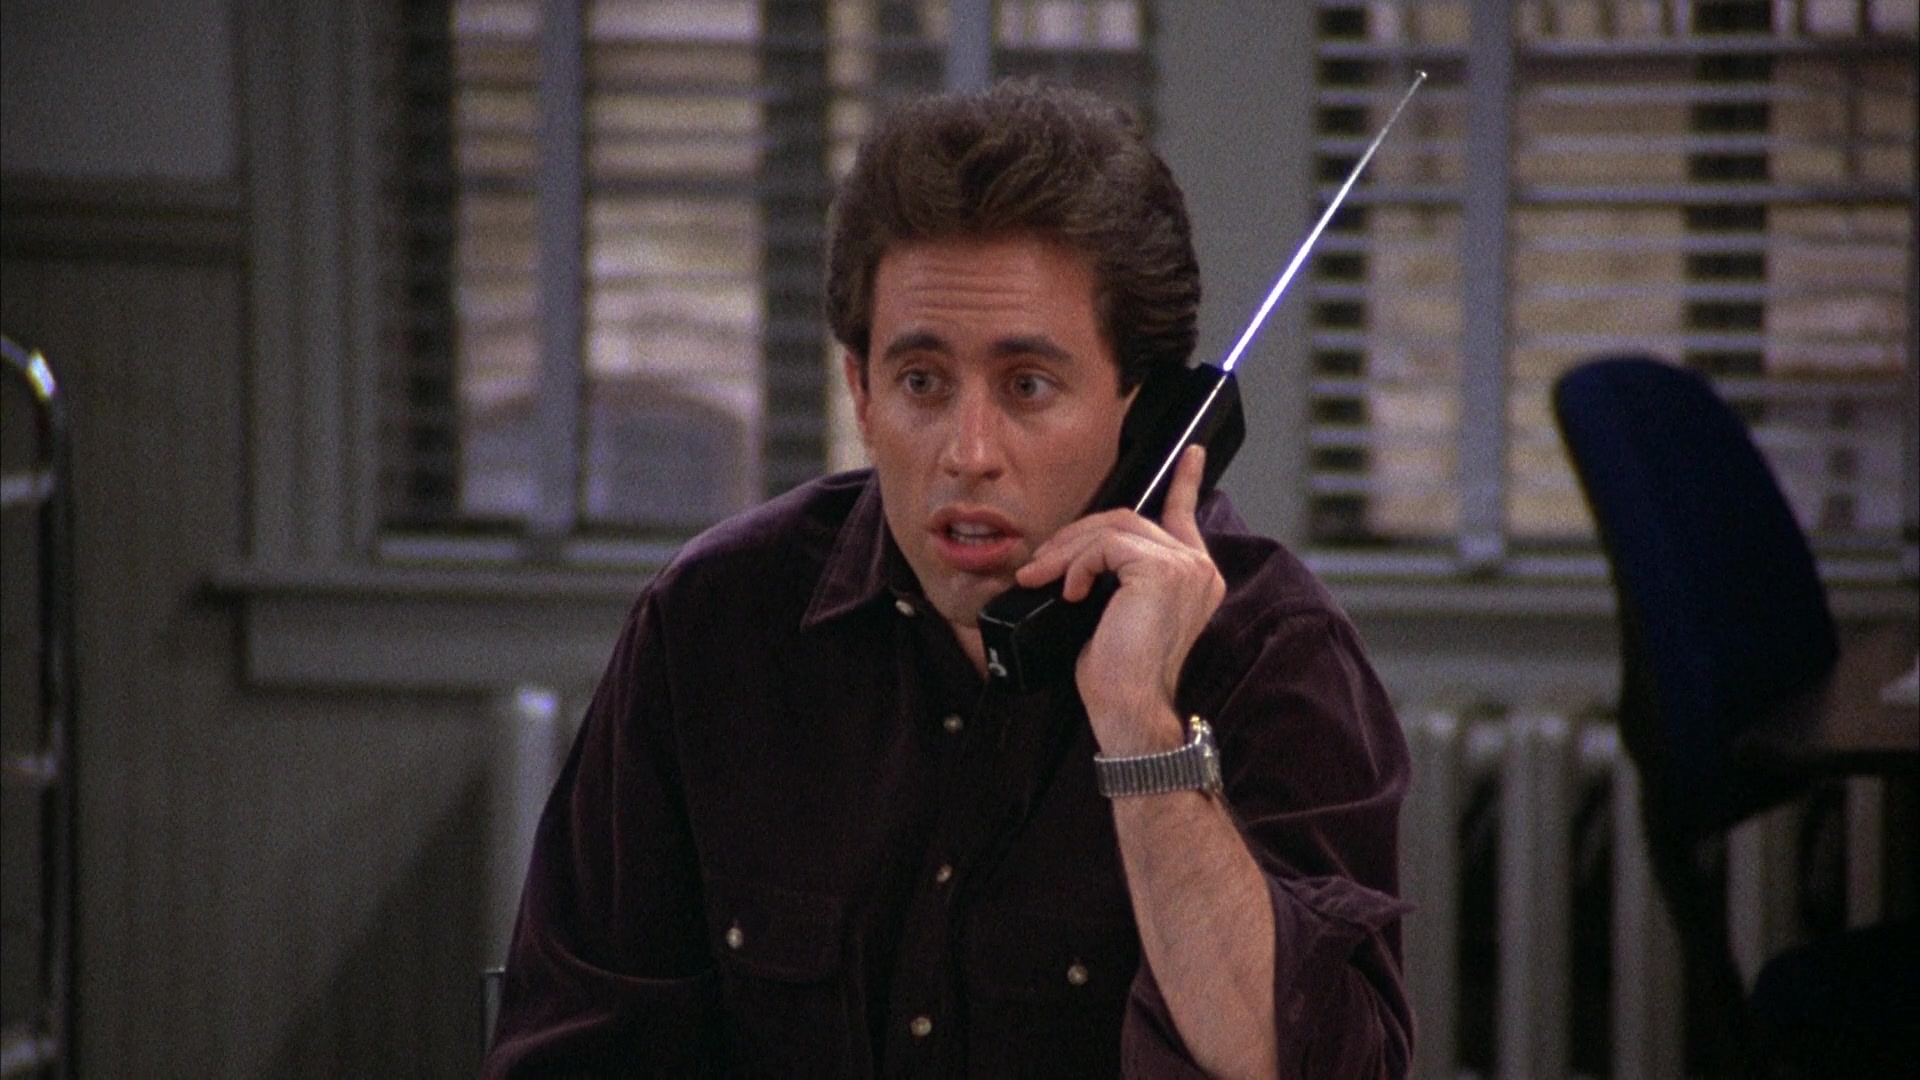 Republican Lawmaker Introduces Seinfeld-Inspired Bill Targeting Telemarketers (mediaite.com)